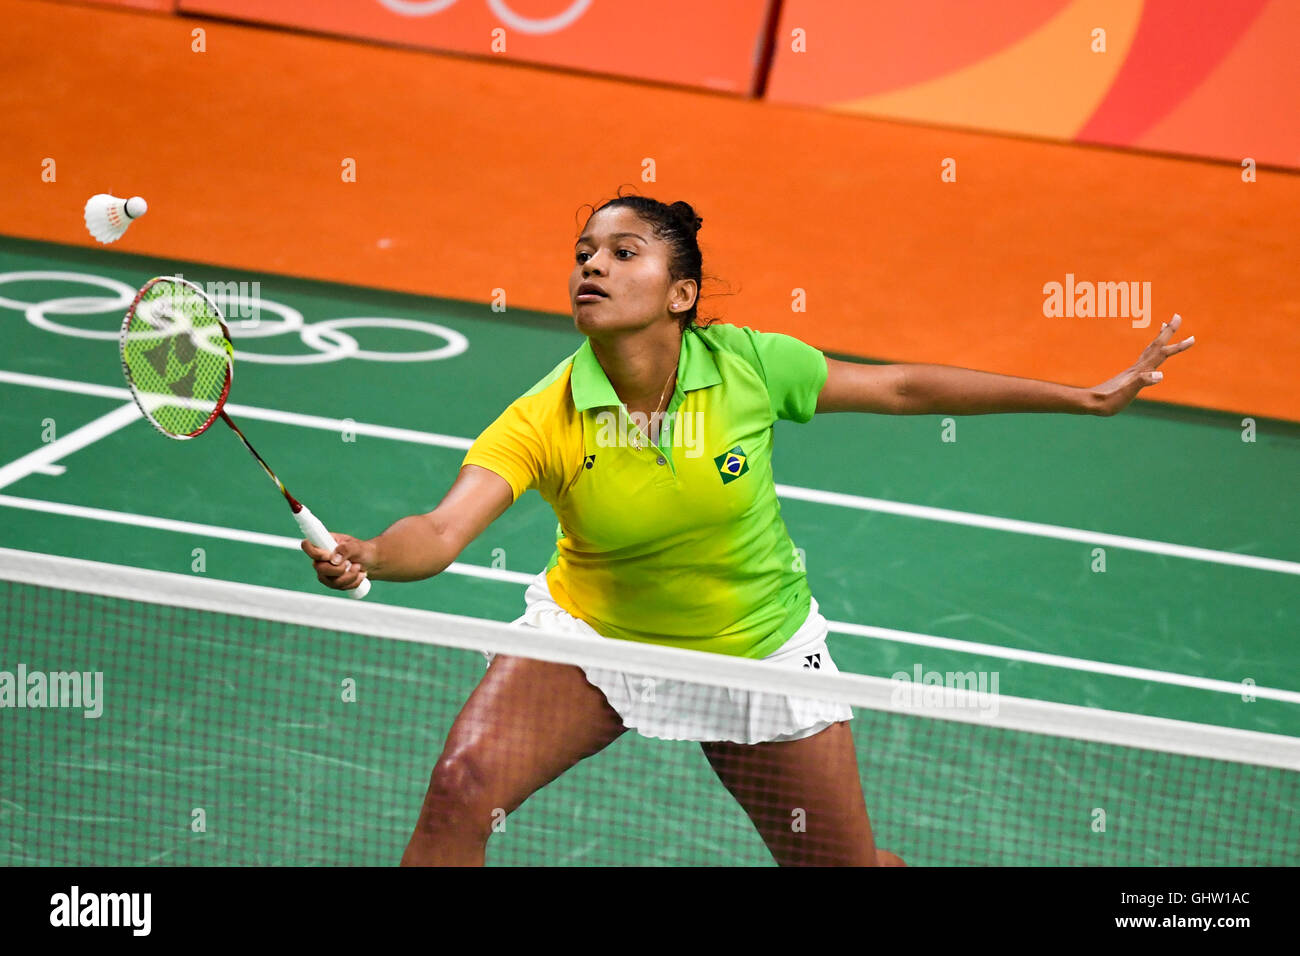 Rio de Janeiro, Brazil. 11th August, 2016. Badminton - VICENTE Lohaynny  (BRA) in the match against Saina Nehwal (IND) during the Badminton 2016  Olympics held in Hall 4 Riocentro. Credit: Foto Arena